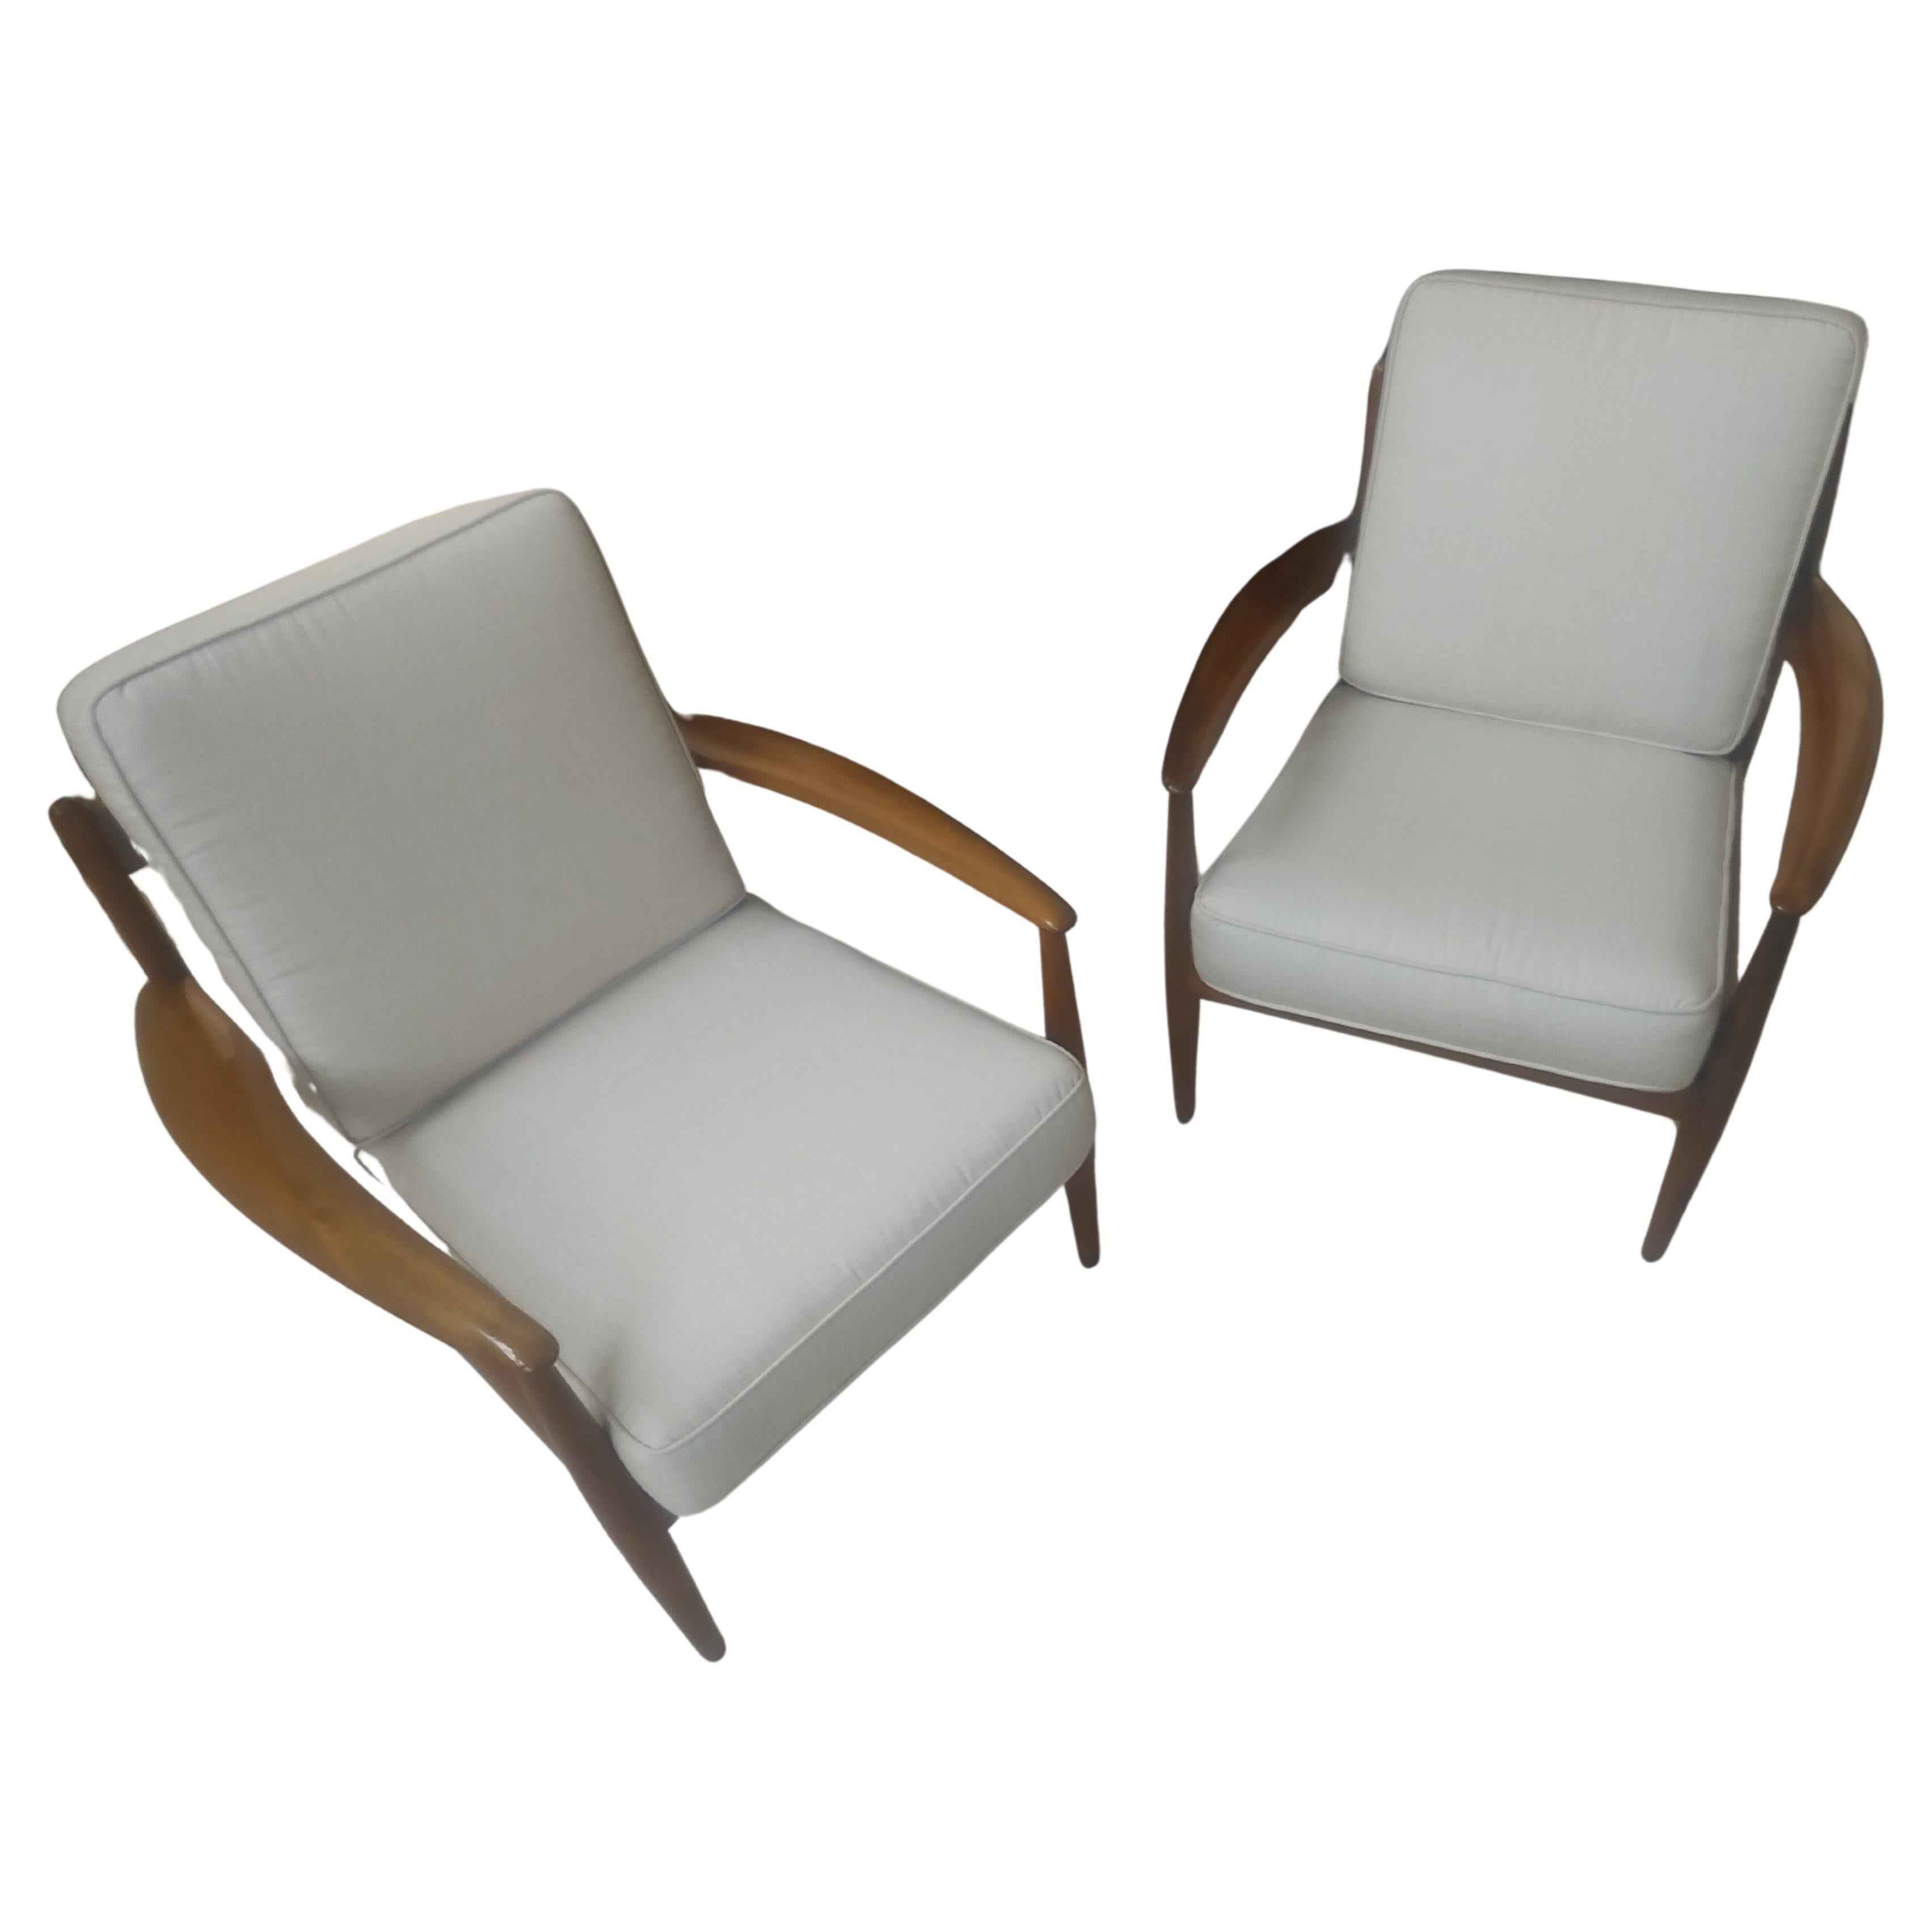 Hand-Crafted Pair Mid Century Danish Modern Beech Lounge Chairs by Grete Jalk - John Stuart  For Sale